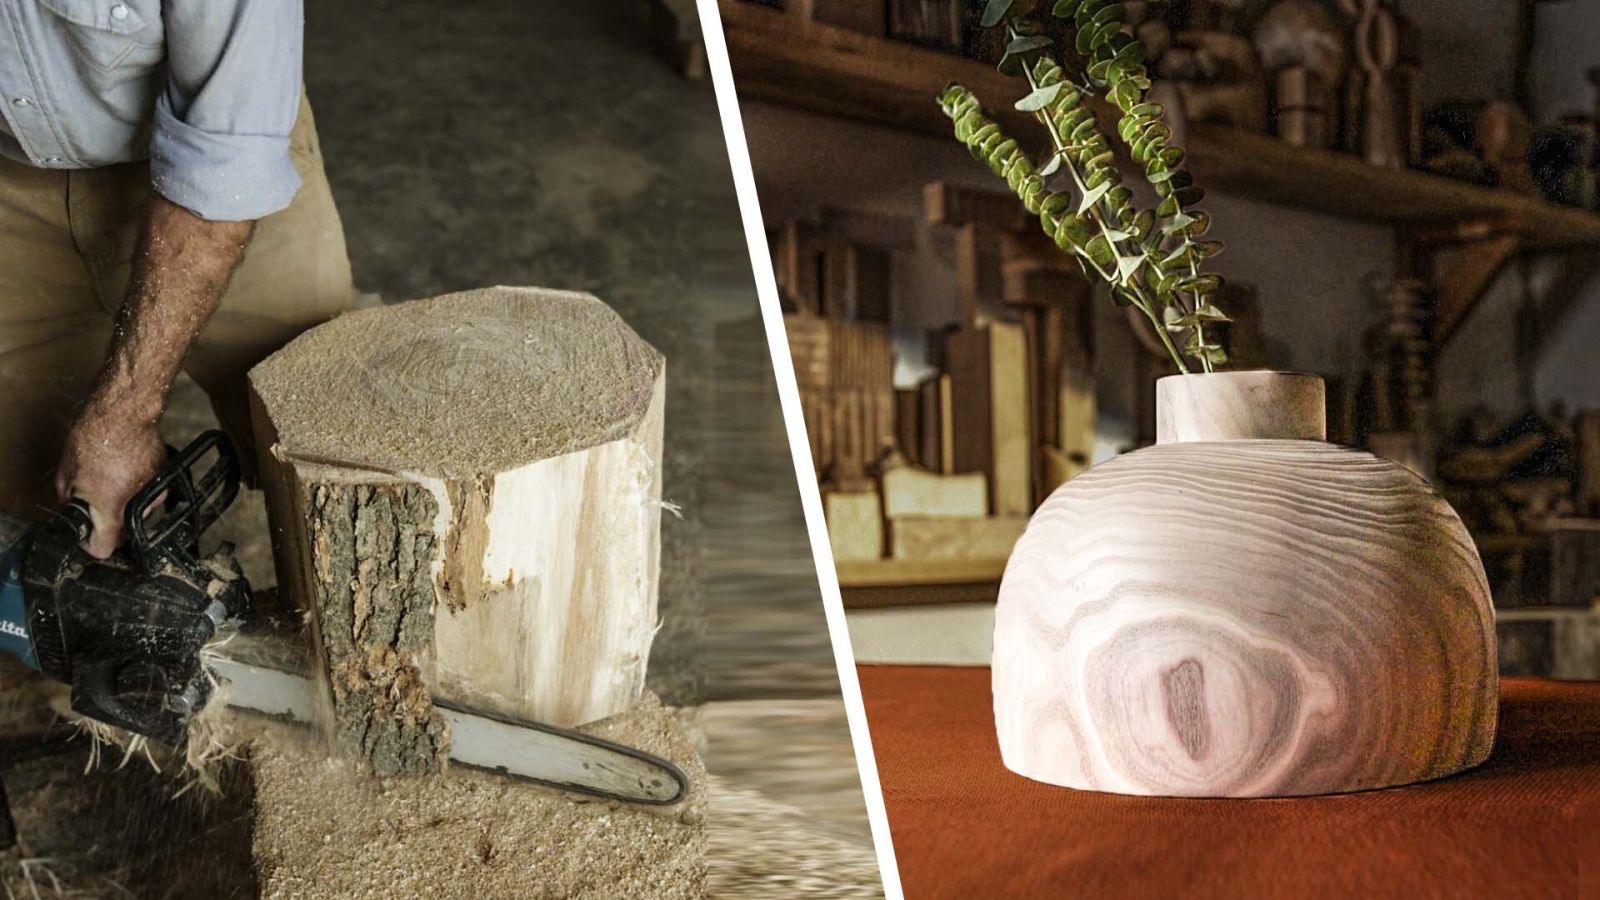 Woodturner Carves a Log Into a Vase From Start To Finish